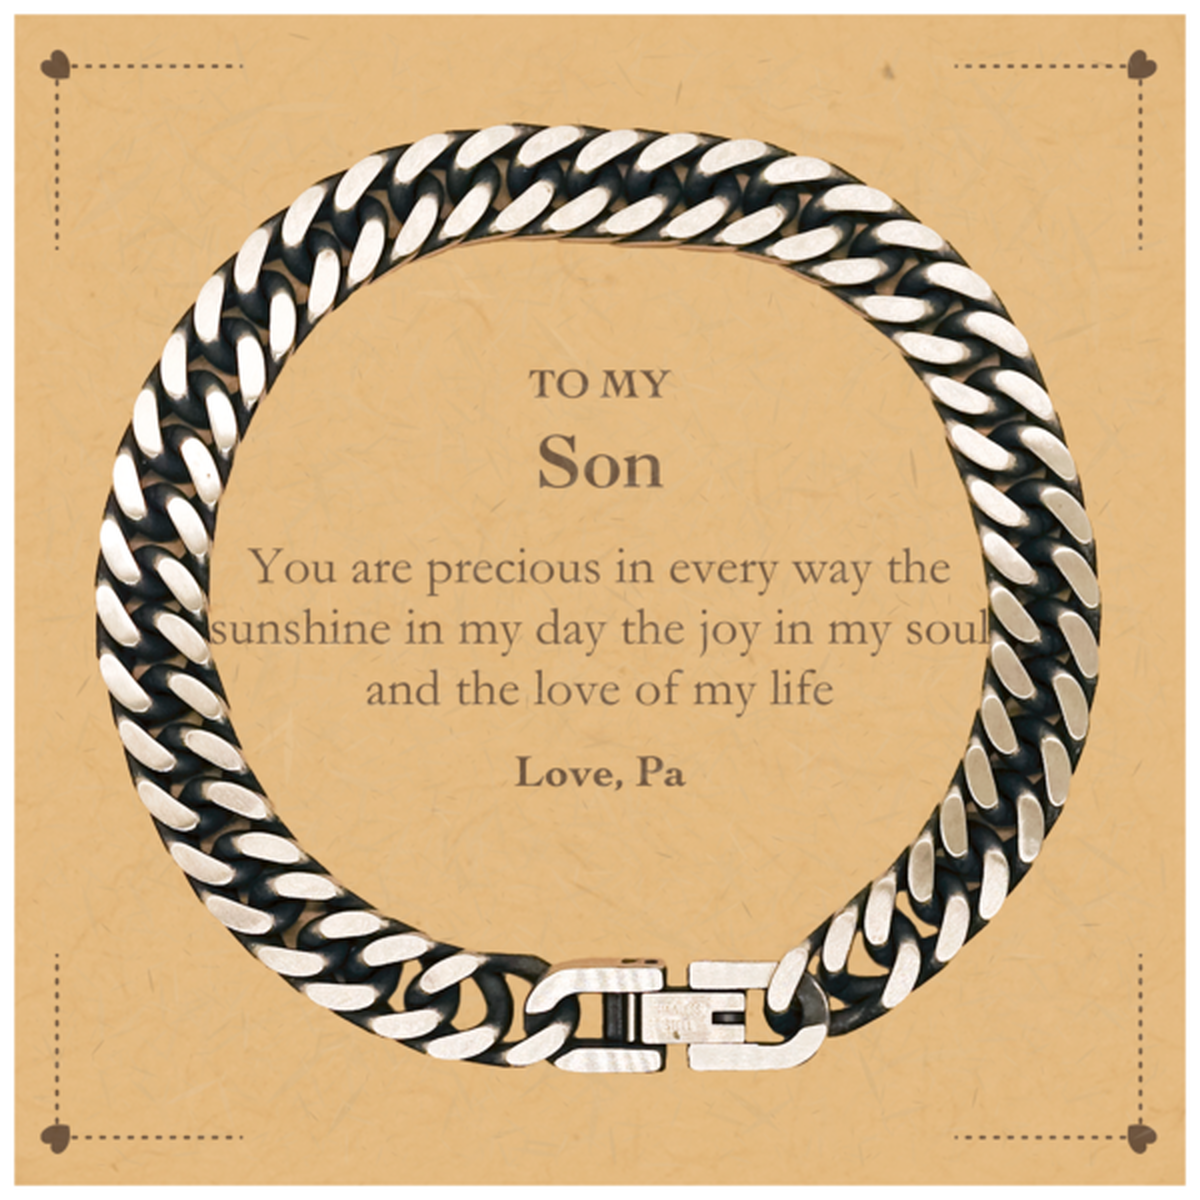 Graduation Gifts for Son Cuban Link Chain Bracelet Present from Pa, Christmas Son Birthday Gifts Son You are precious in every way the sunshine in my day. Love, Pa